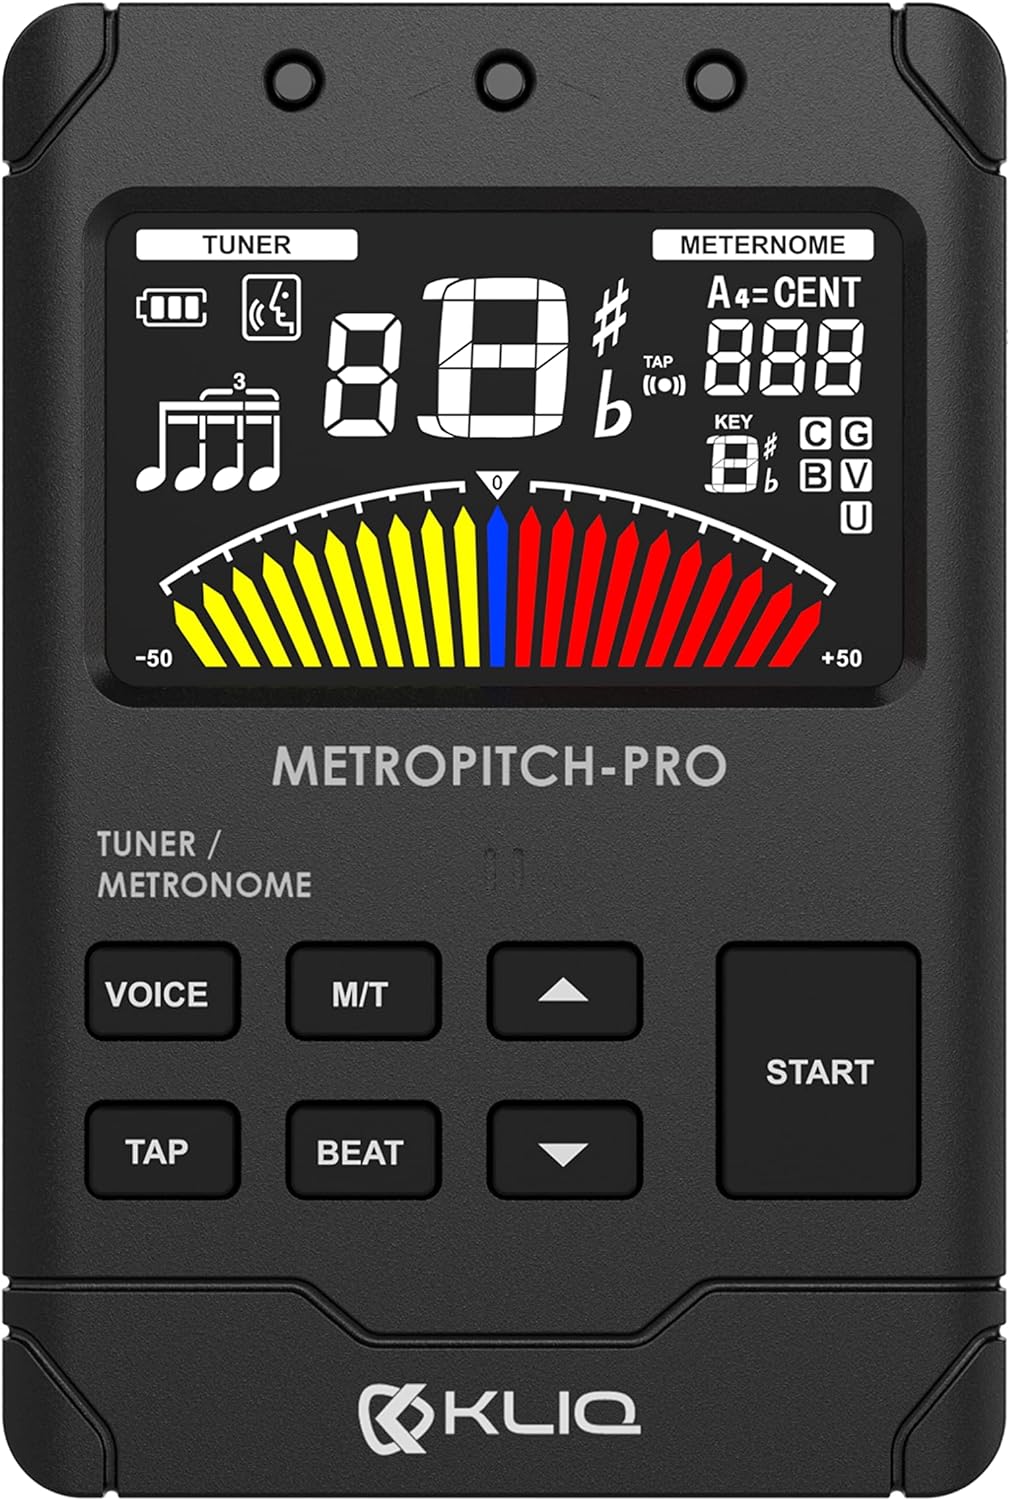 KLIQ MetroPitch-PRO - Rechargeable Metronome Tuner for All Instruments - with Guitar, Bass, Violin, Ukulele, and Chromatic Tuning Modes - Tone Generator - Wired sensor Included, Black